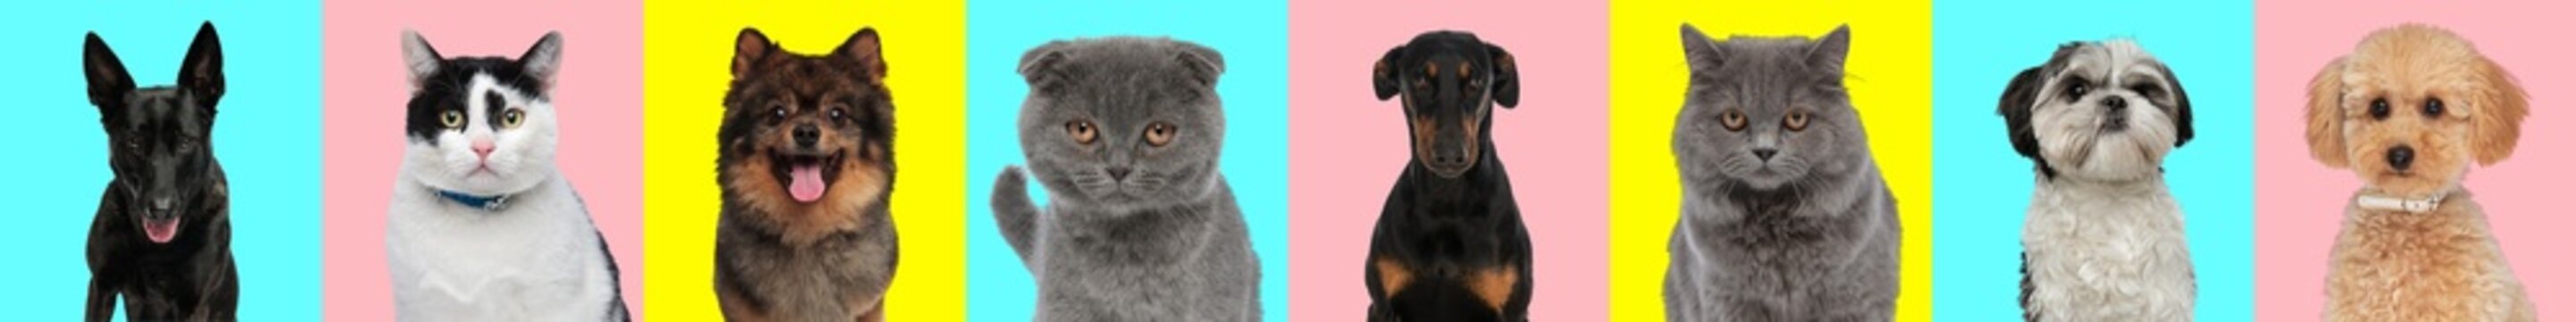 horizontal collage of pictures with dogs and cats on colorful background